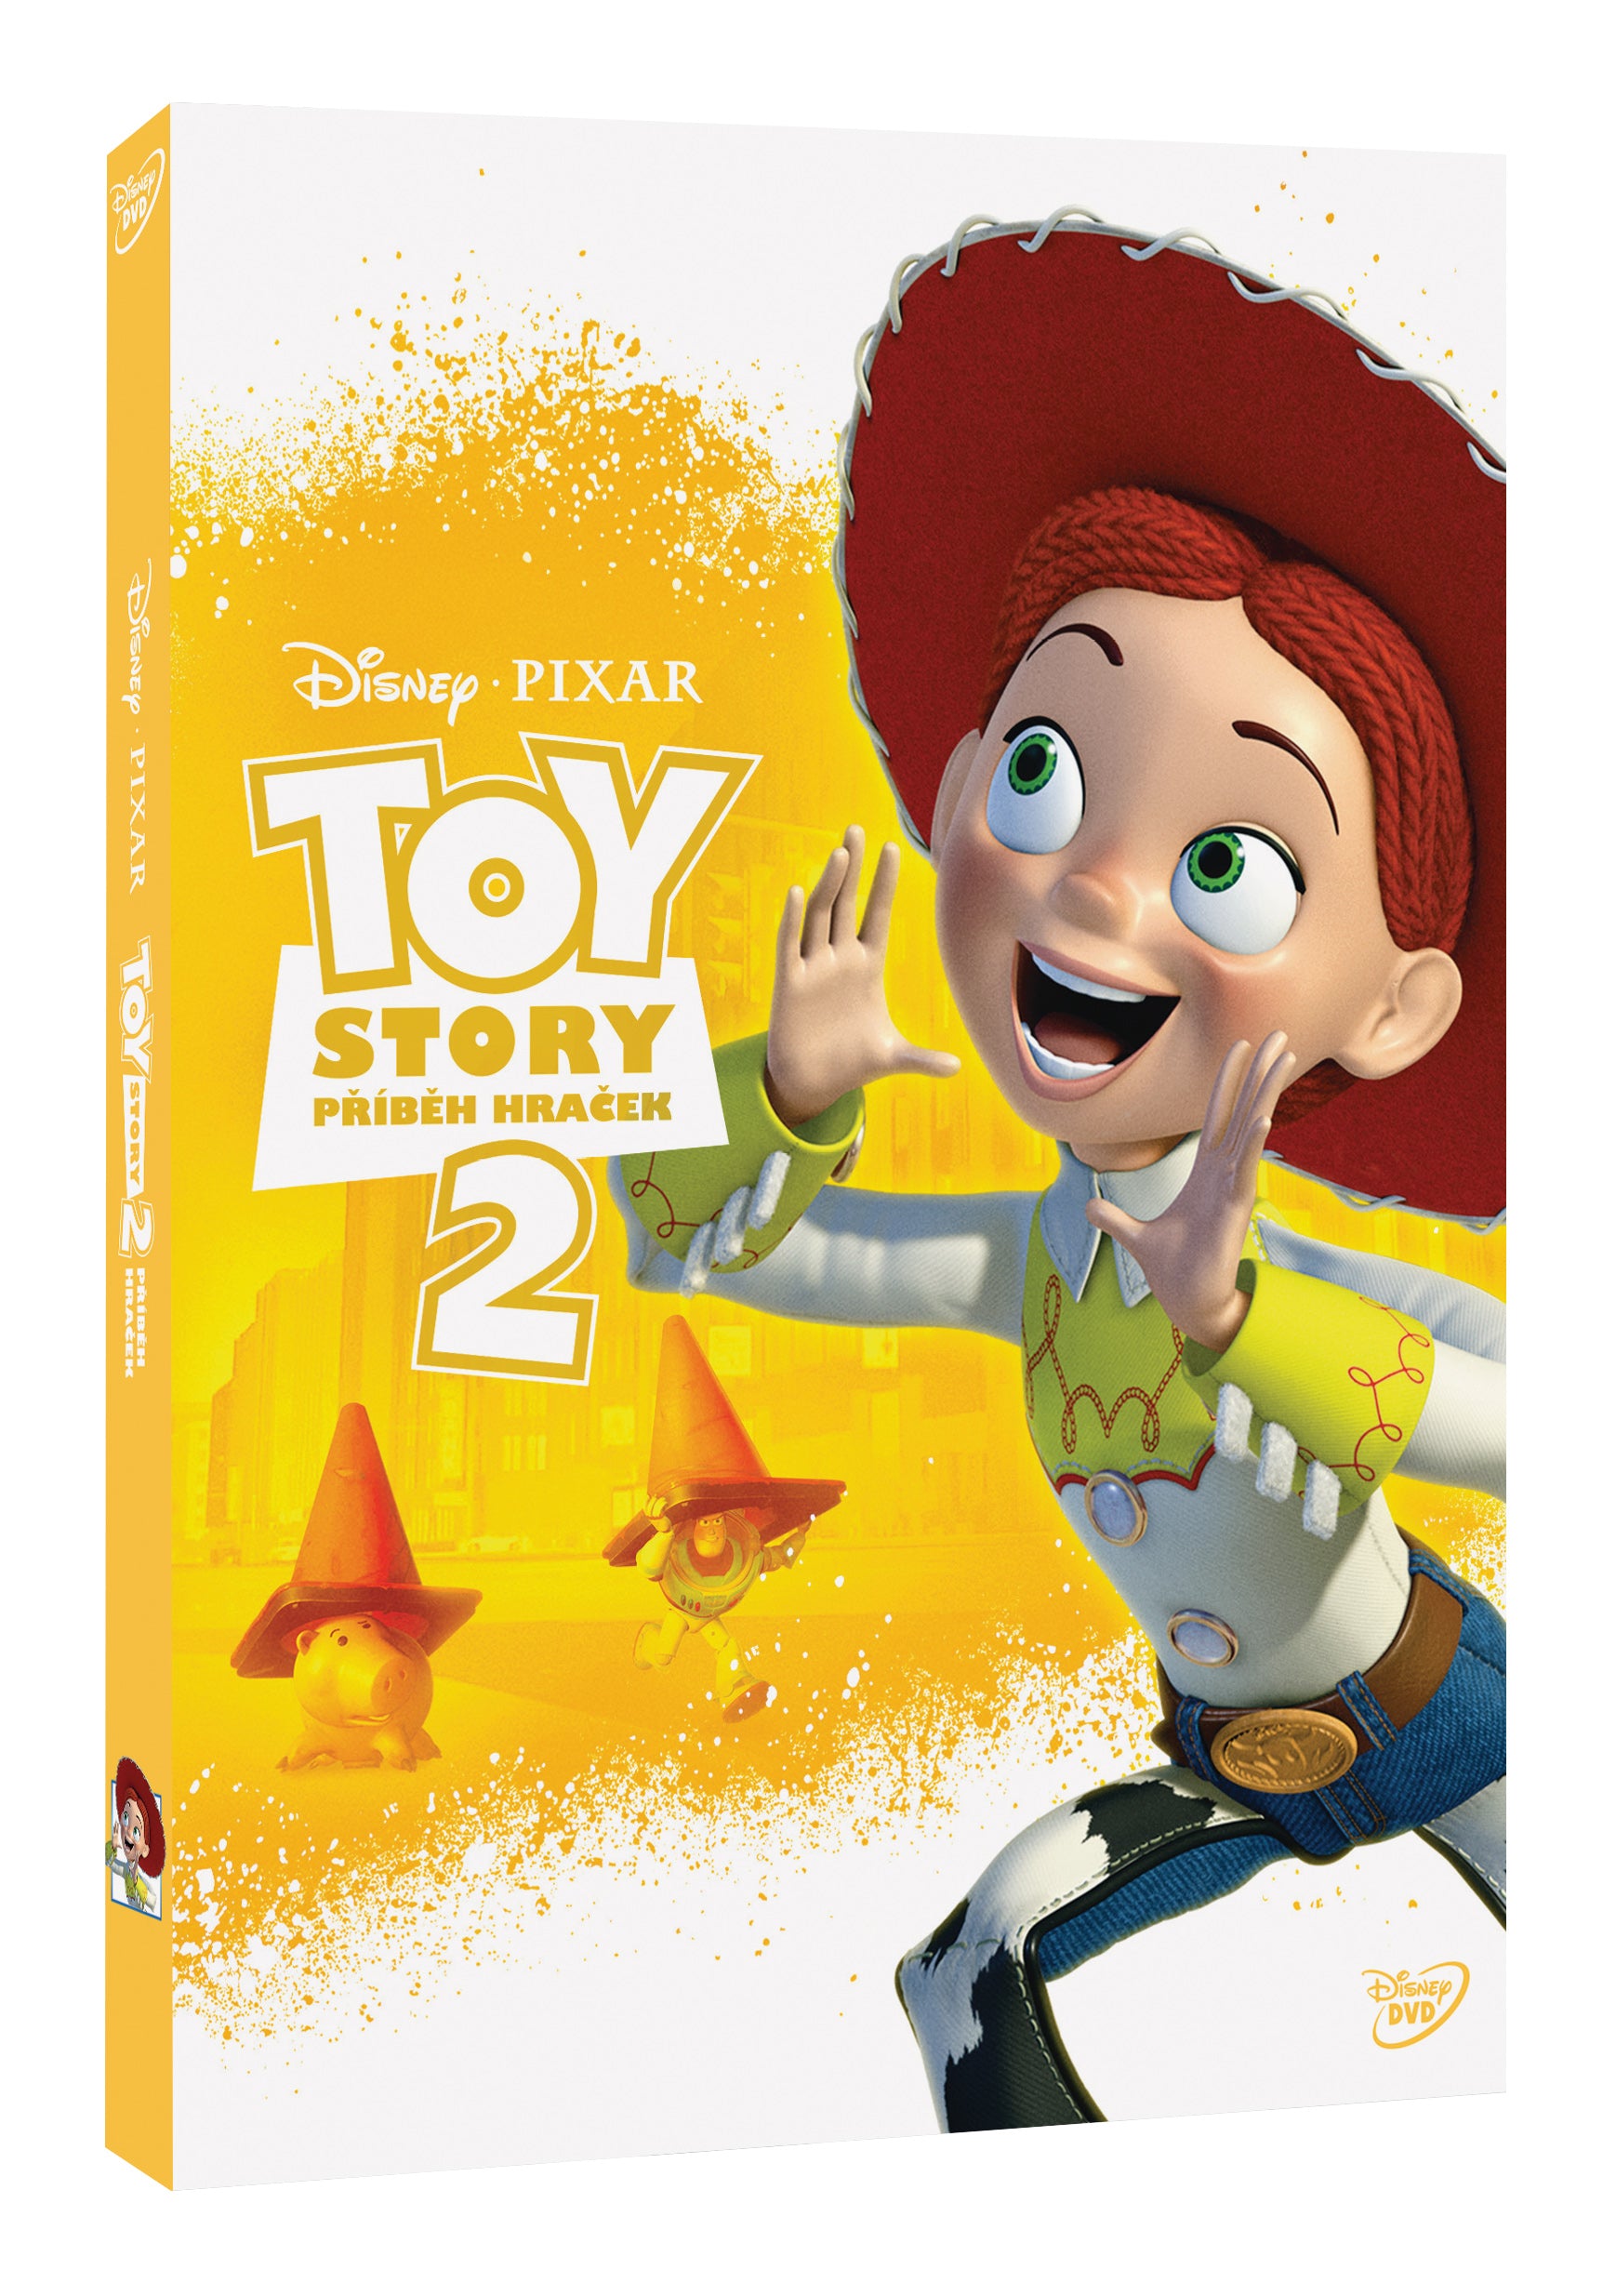 Toy Story 2: Pribeh hracek S.E. DVD - Edice Pixar New Line / Toy Story 2 Special Edition